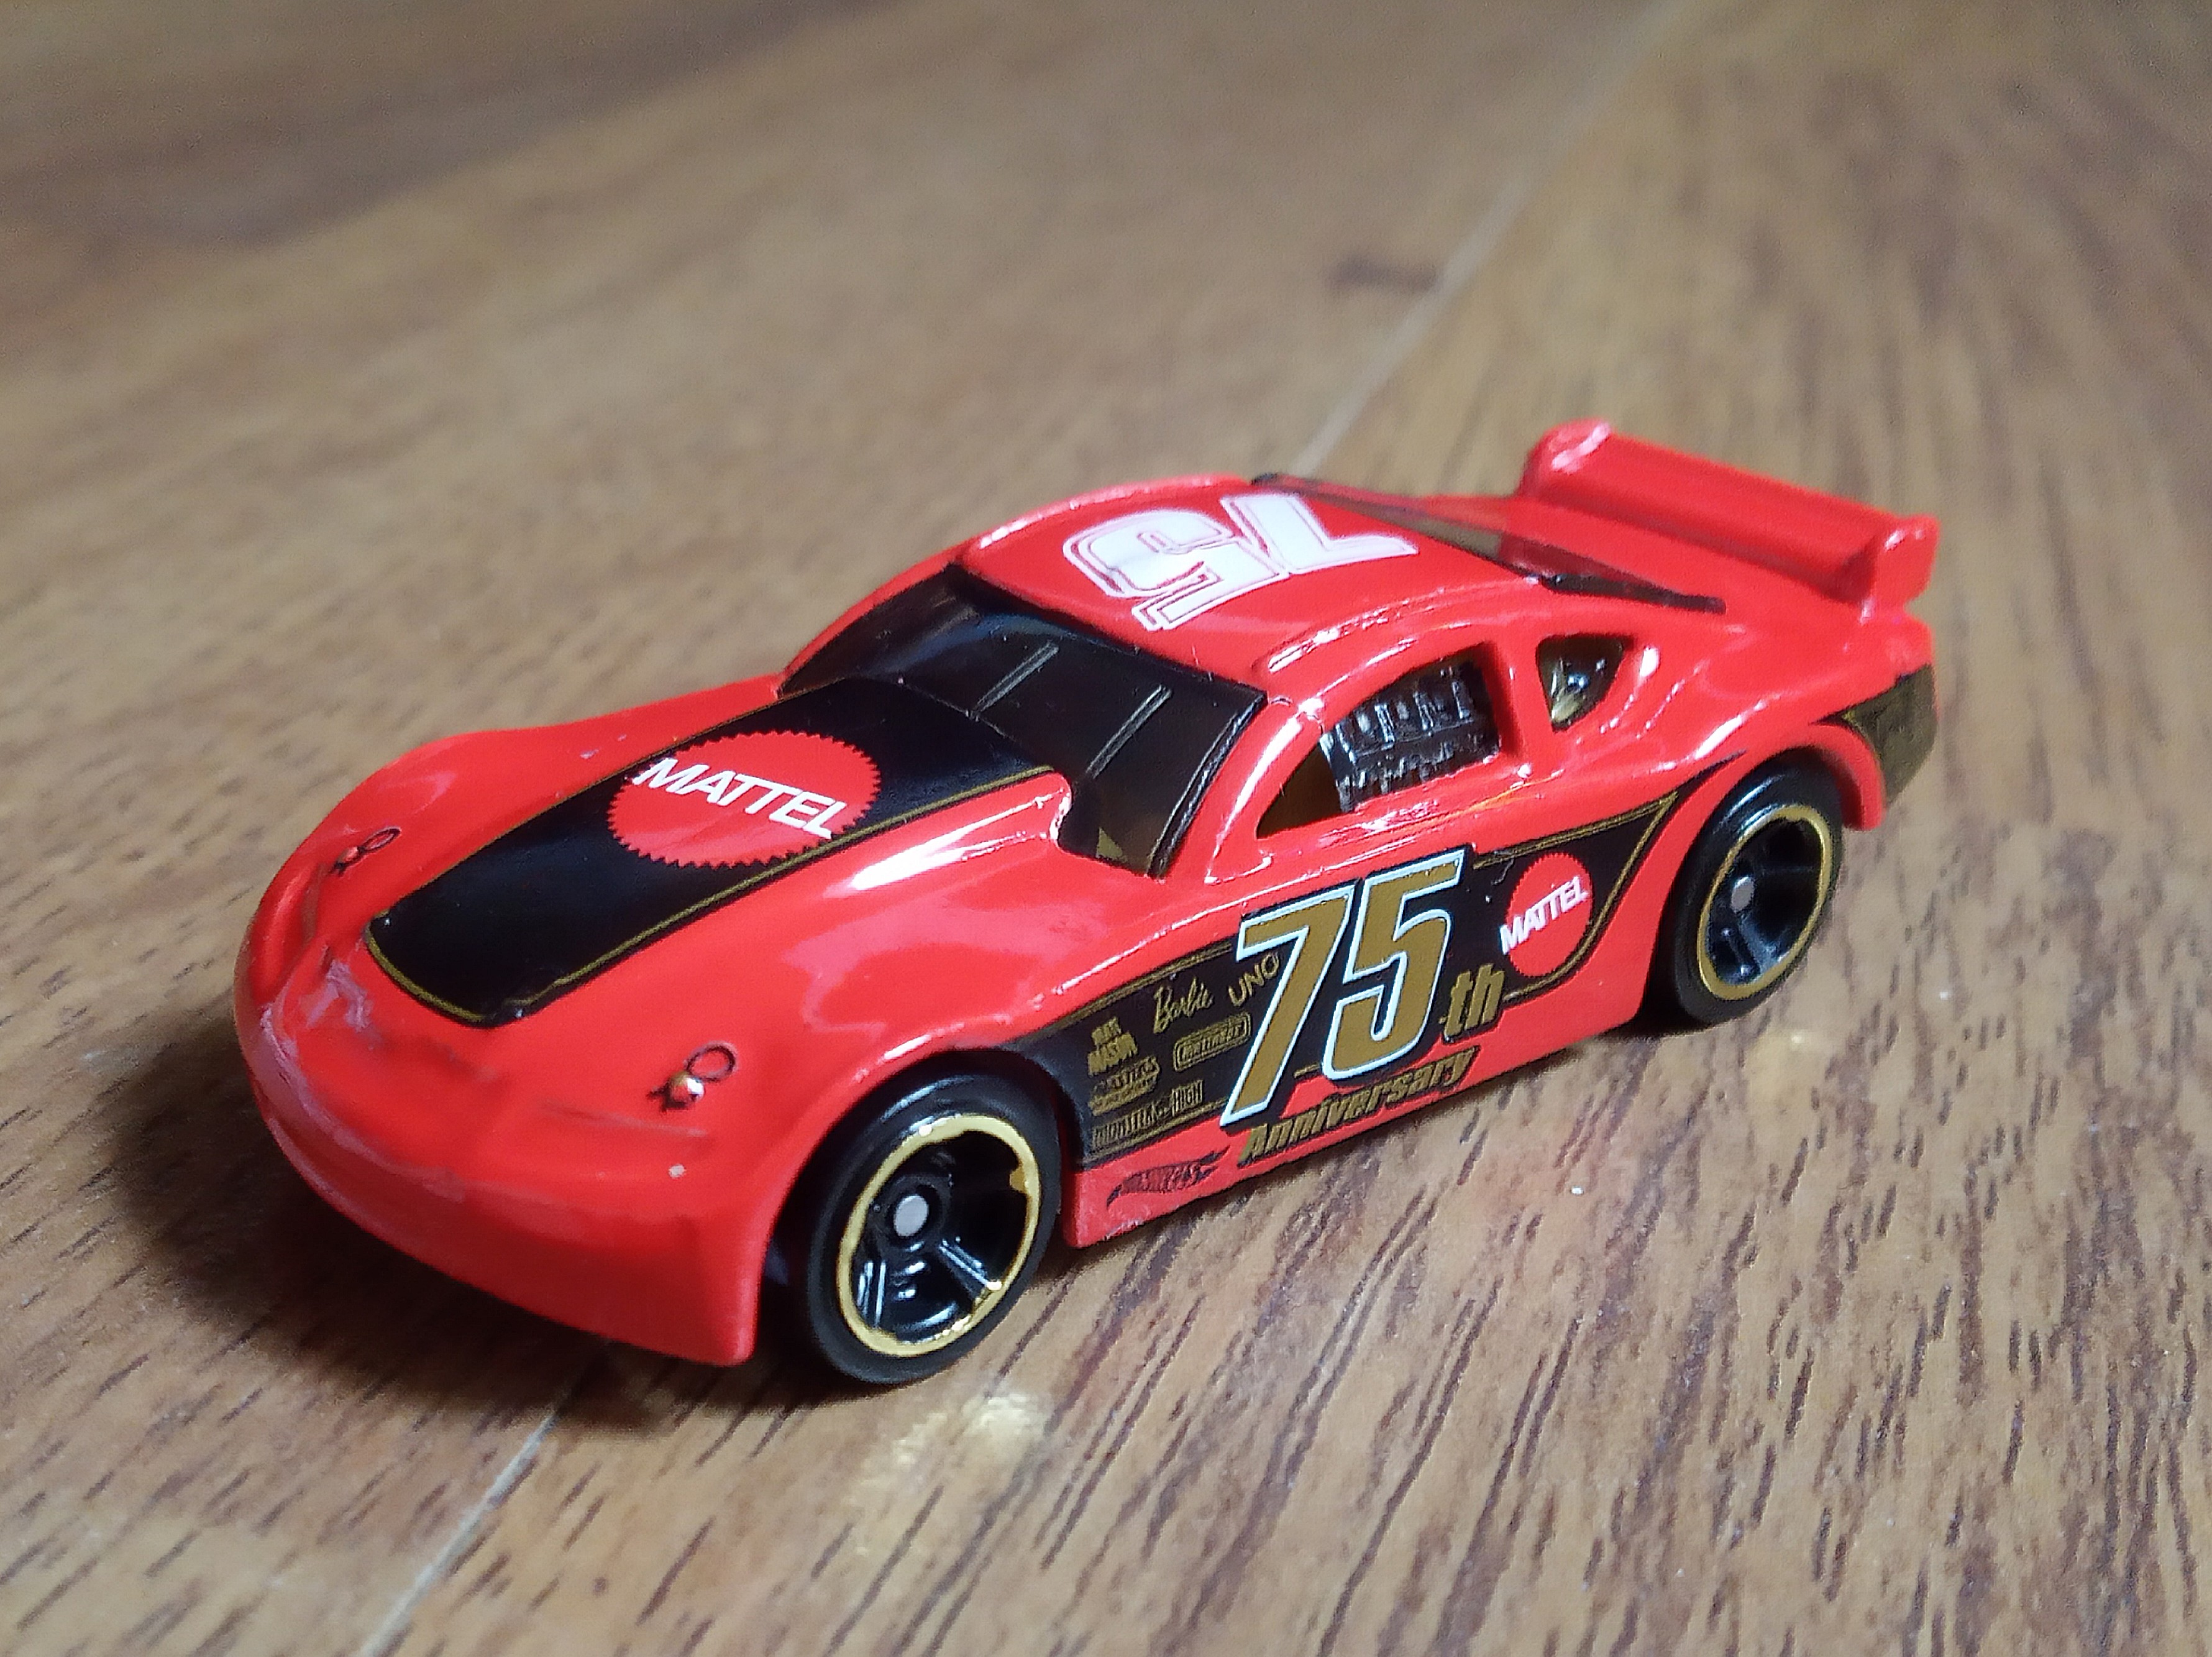 Details about   2014 Hot Wheels CIRCLE TRACKER ✰White pearl;red rim pr5 variant✰ 3 Racing✰ 